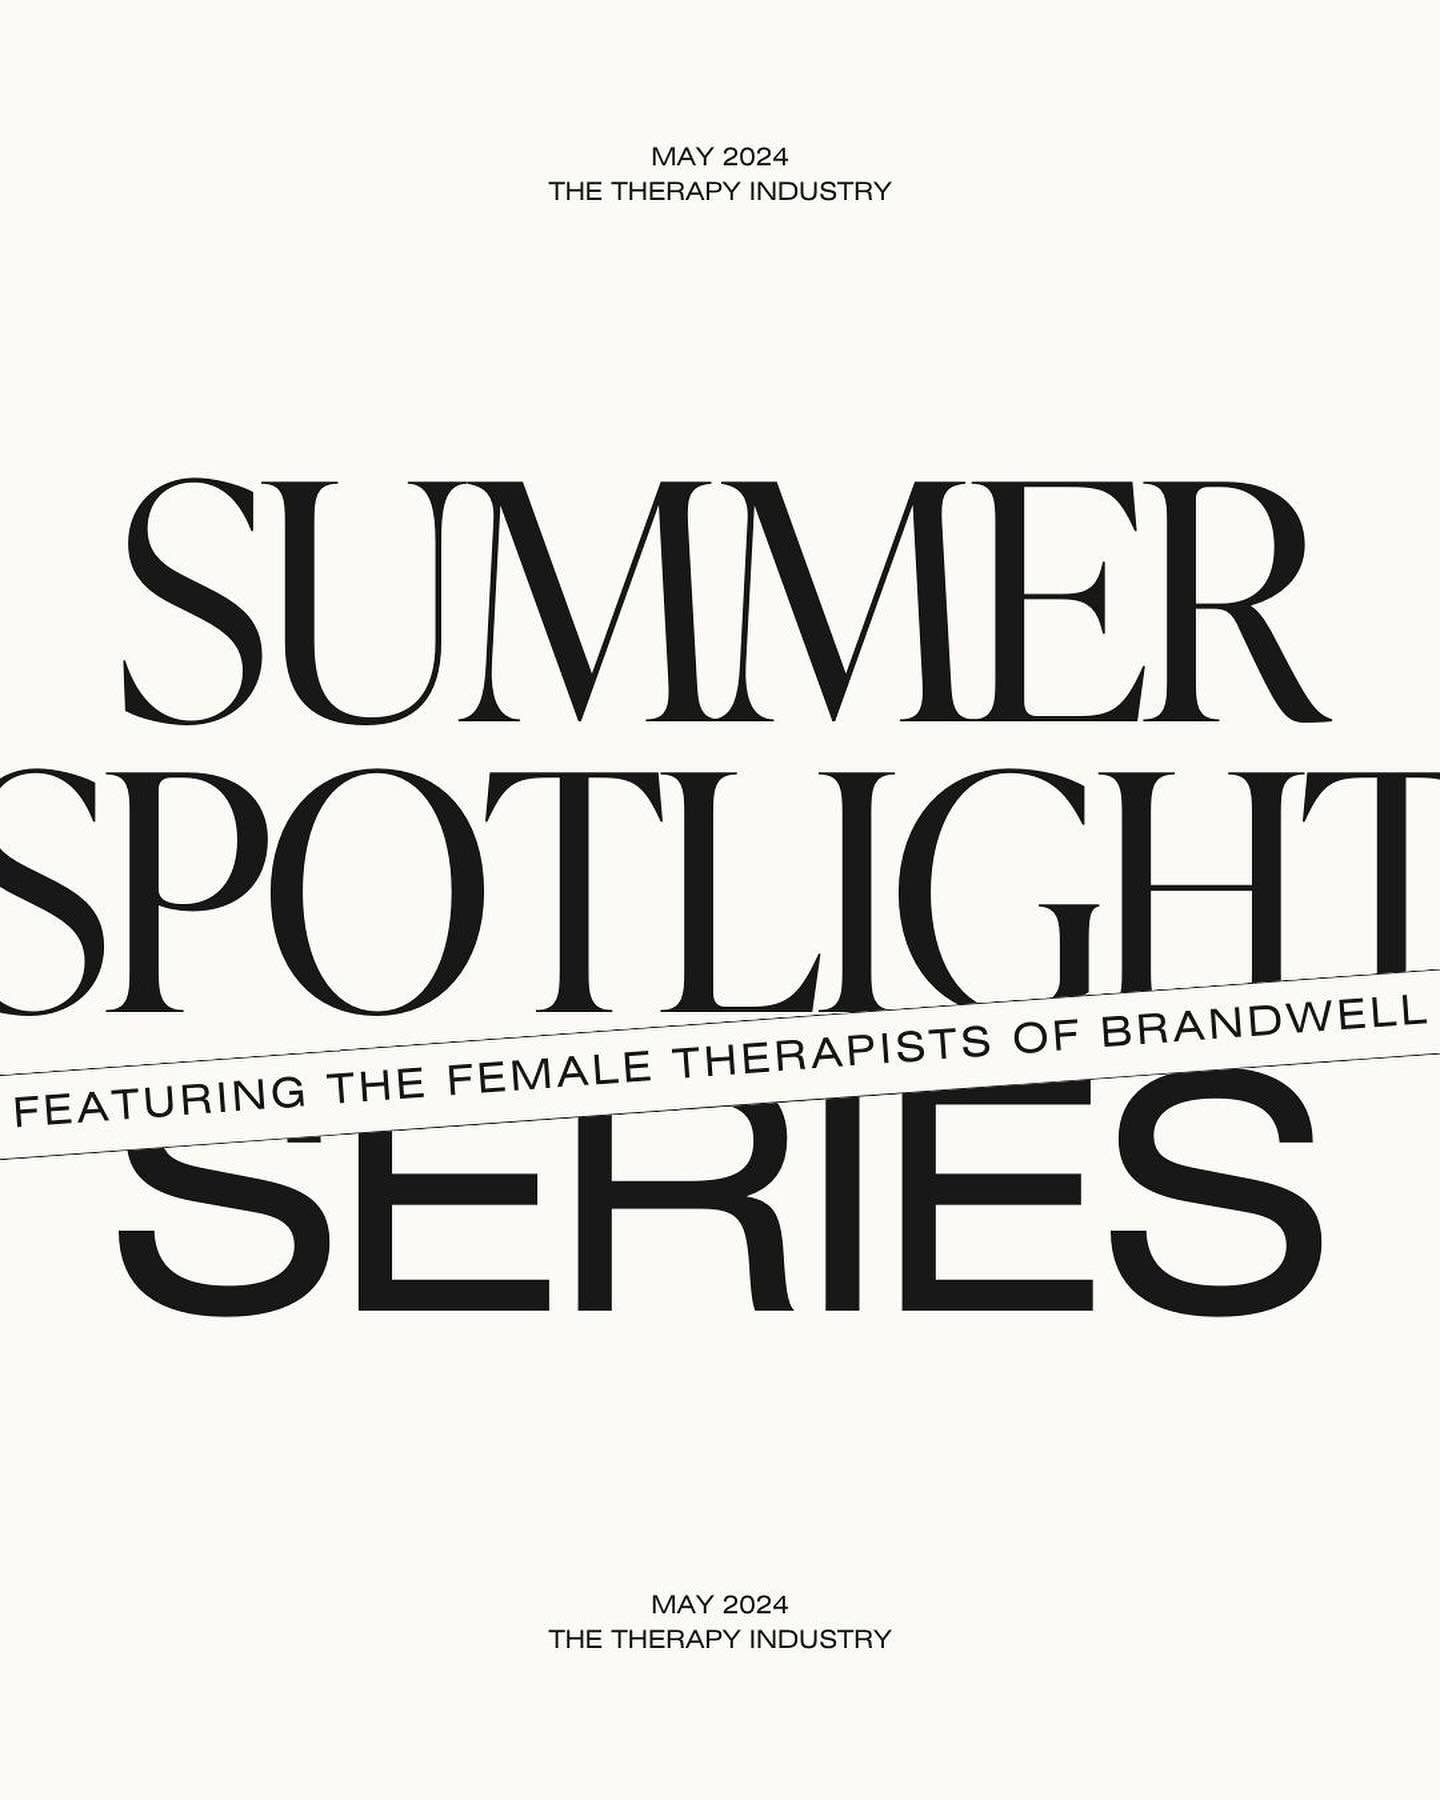 SUMMER SPOTLIGHT SERIES! This summer, we&rsquo;ll highlight some of our top industries and the incredible women disrupting them. 
⠀⠀⠀⠀⠀⠀⠀⠀⠀
In honor of May being Mental Health Awareness Month, we are kicking things off by highlighting the many therap